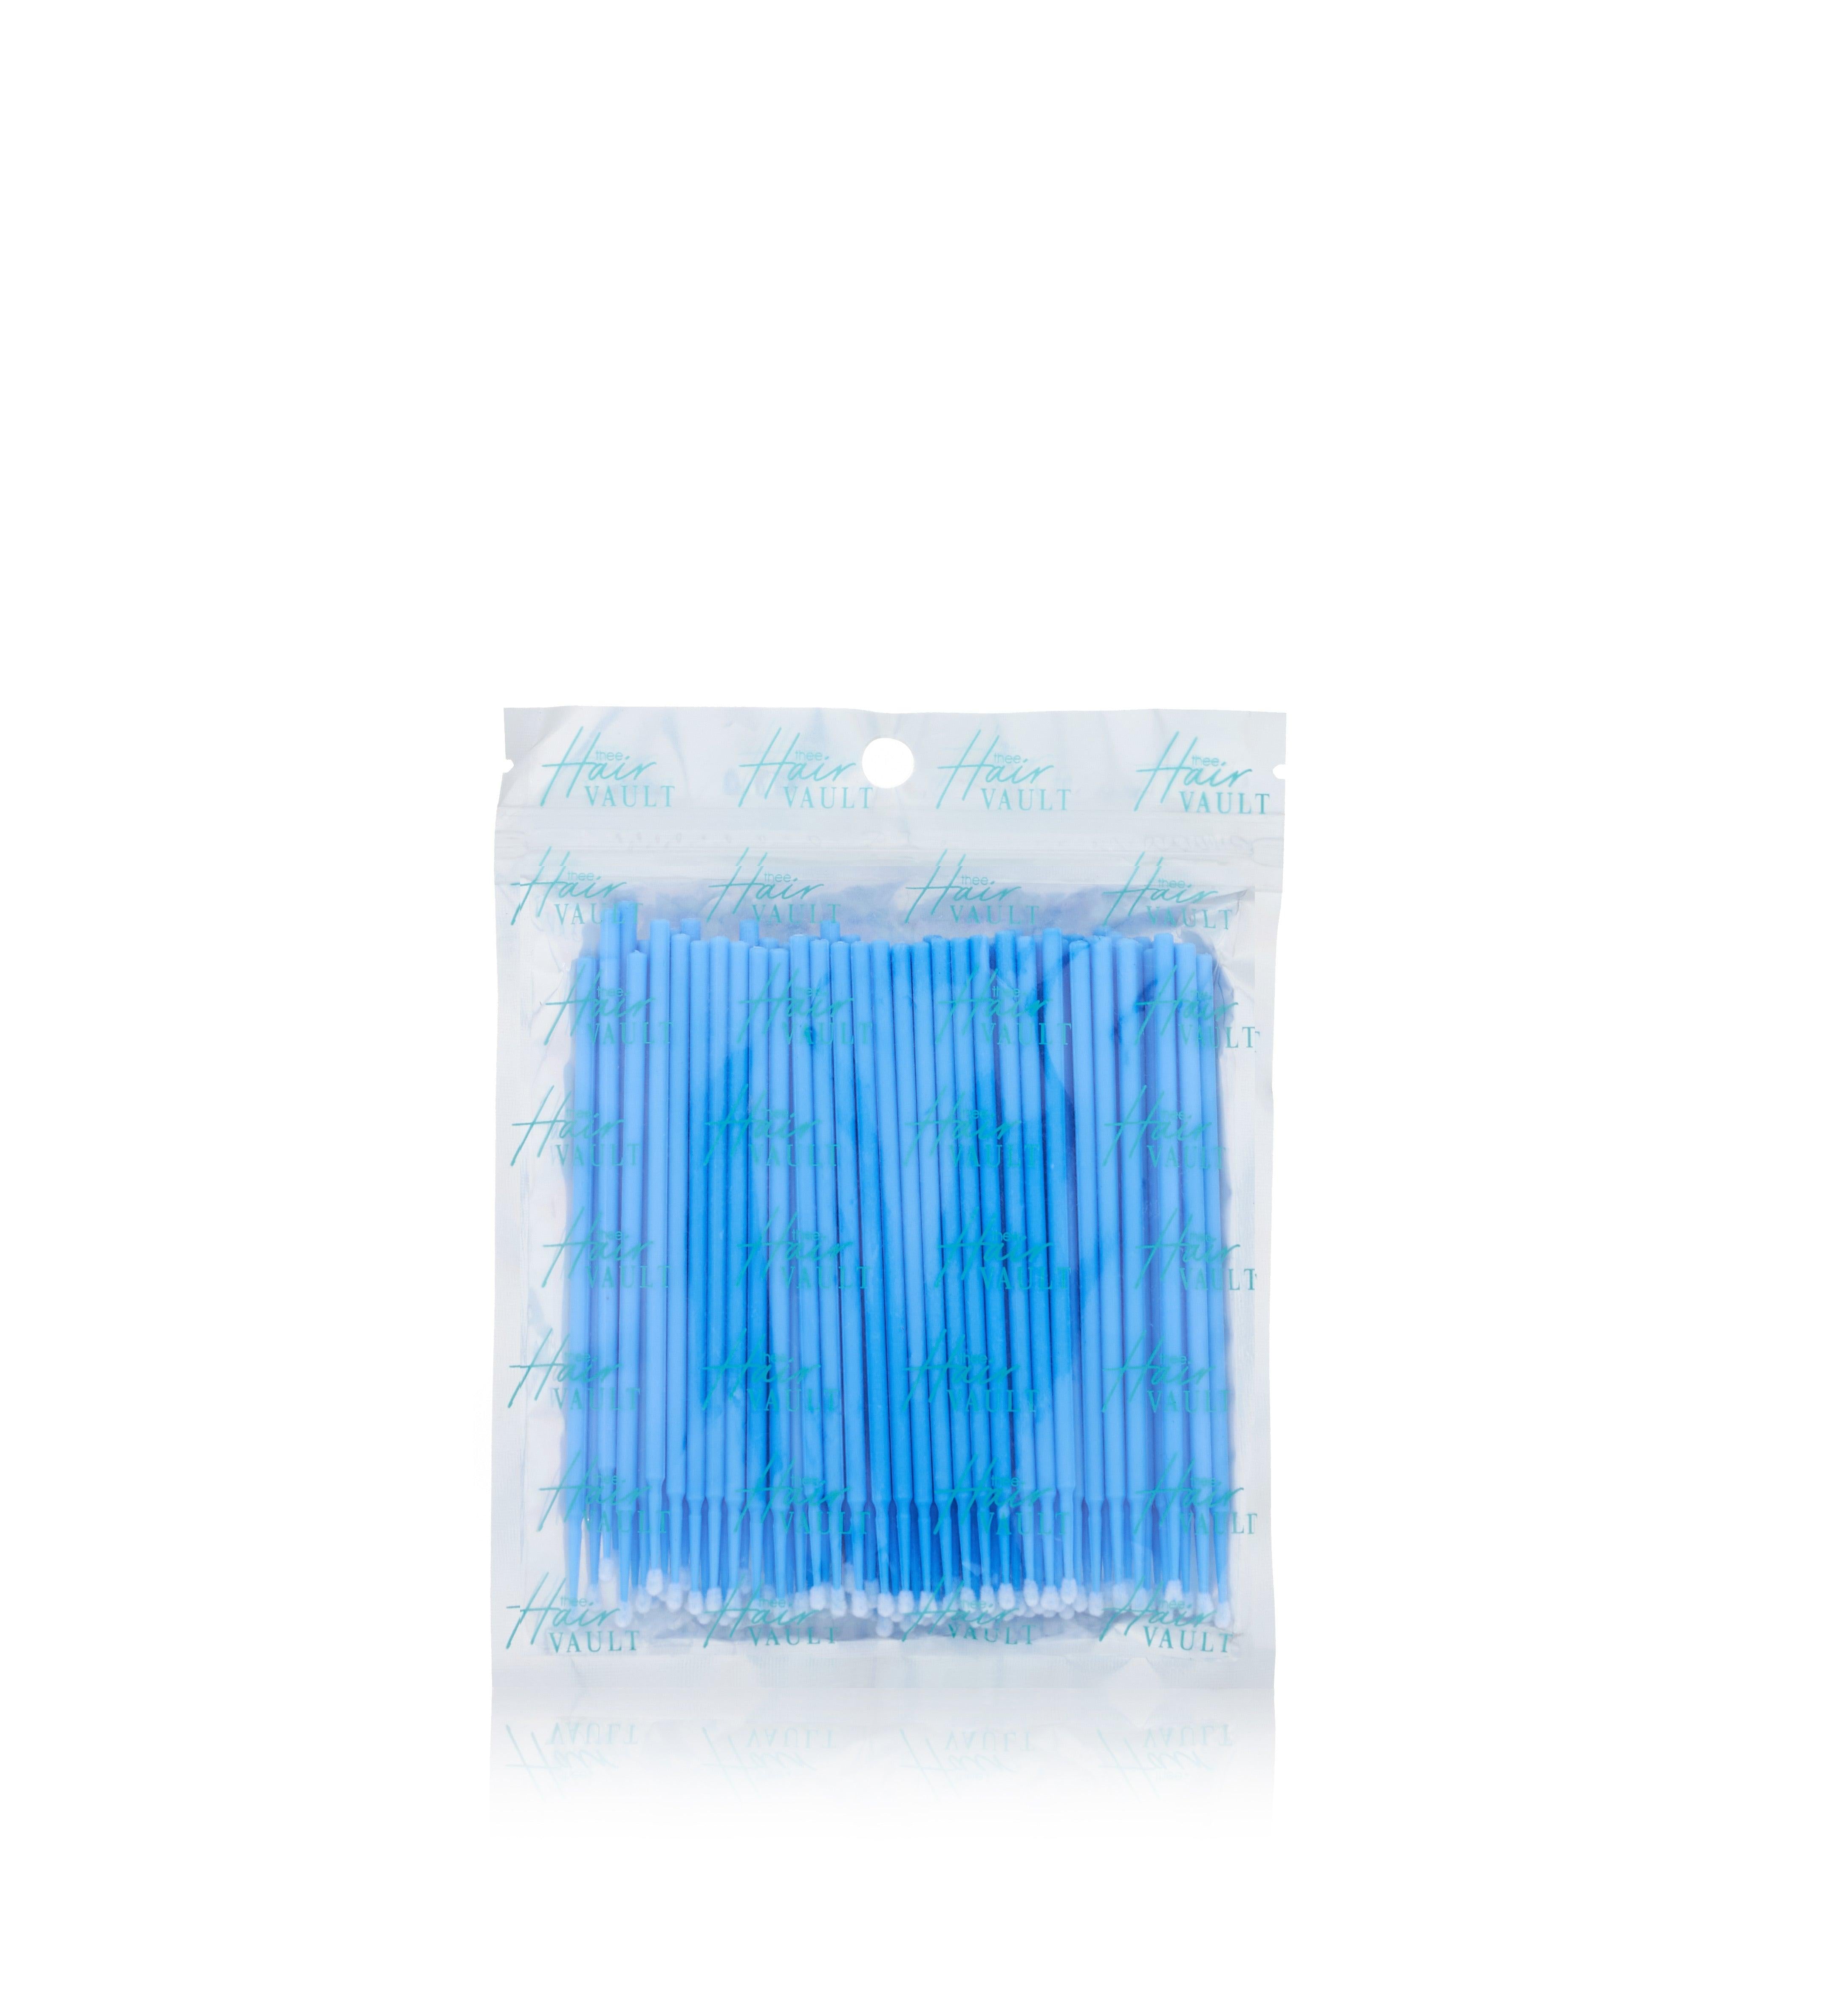 MICRO APPLICATORS FOR EYELASH EXTENSIONS 100-count - Thee Hair Vault